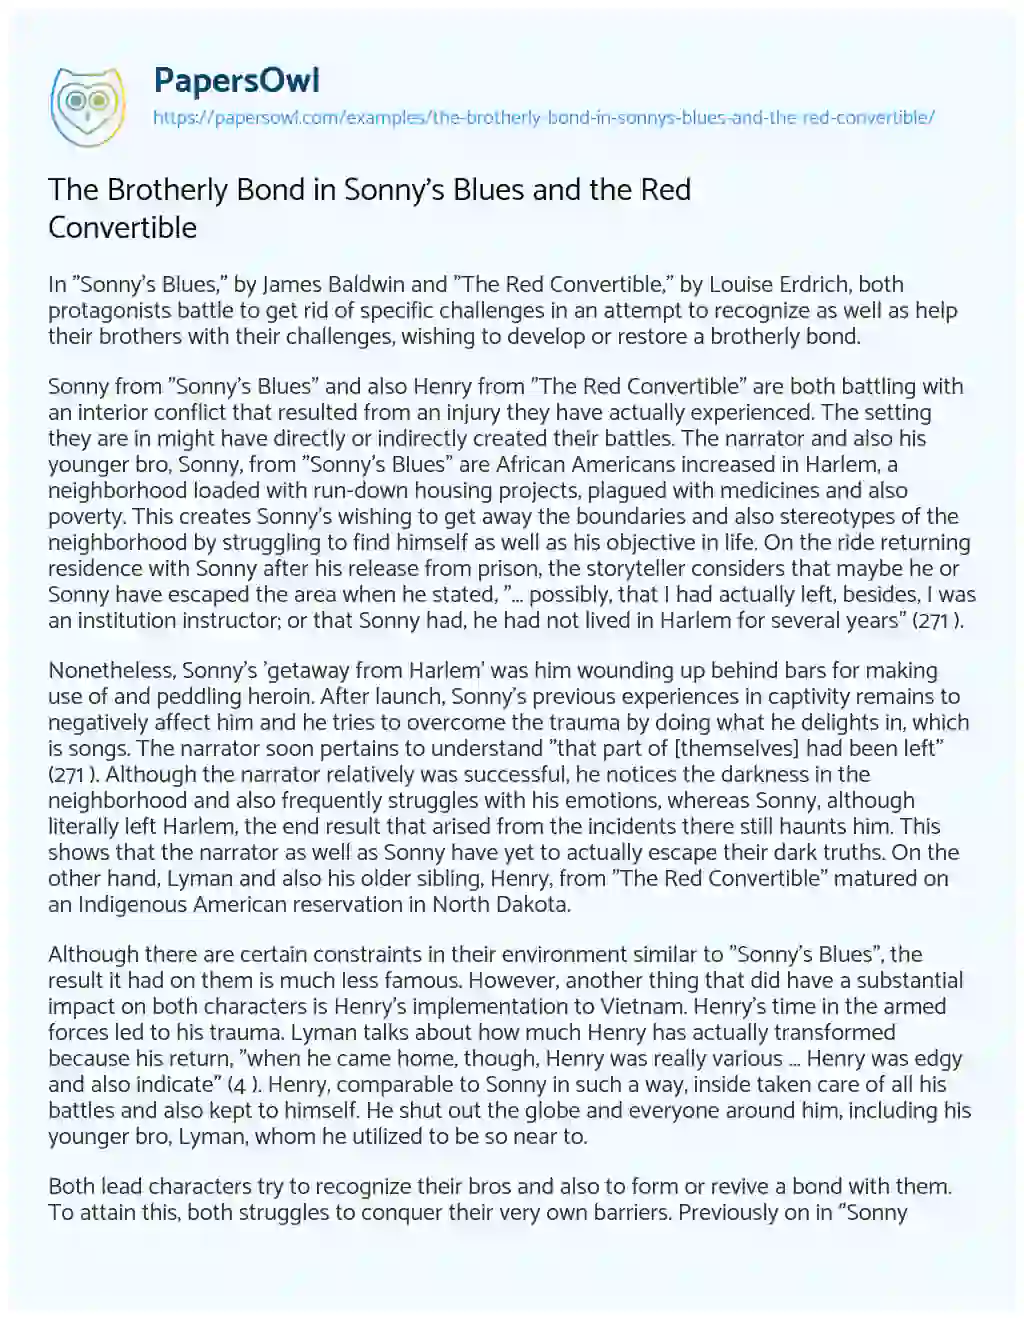 Essay on The Brotherly Bond in Sonny’s Blues and the Red Convertible